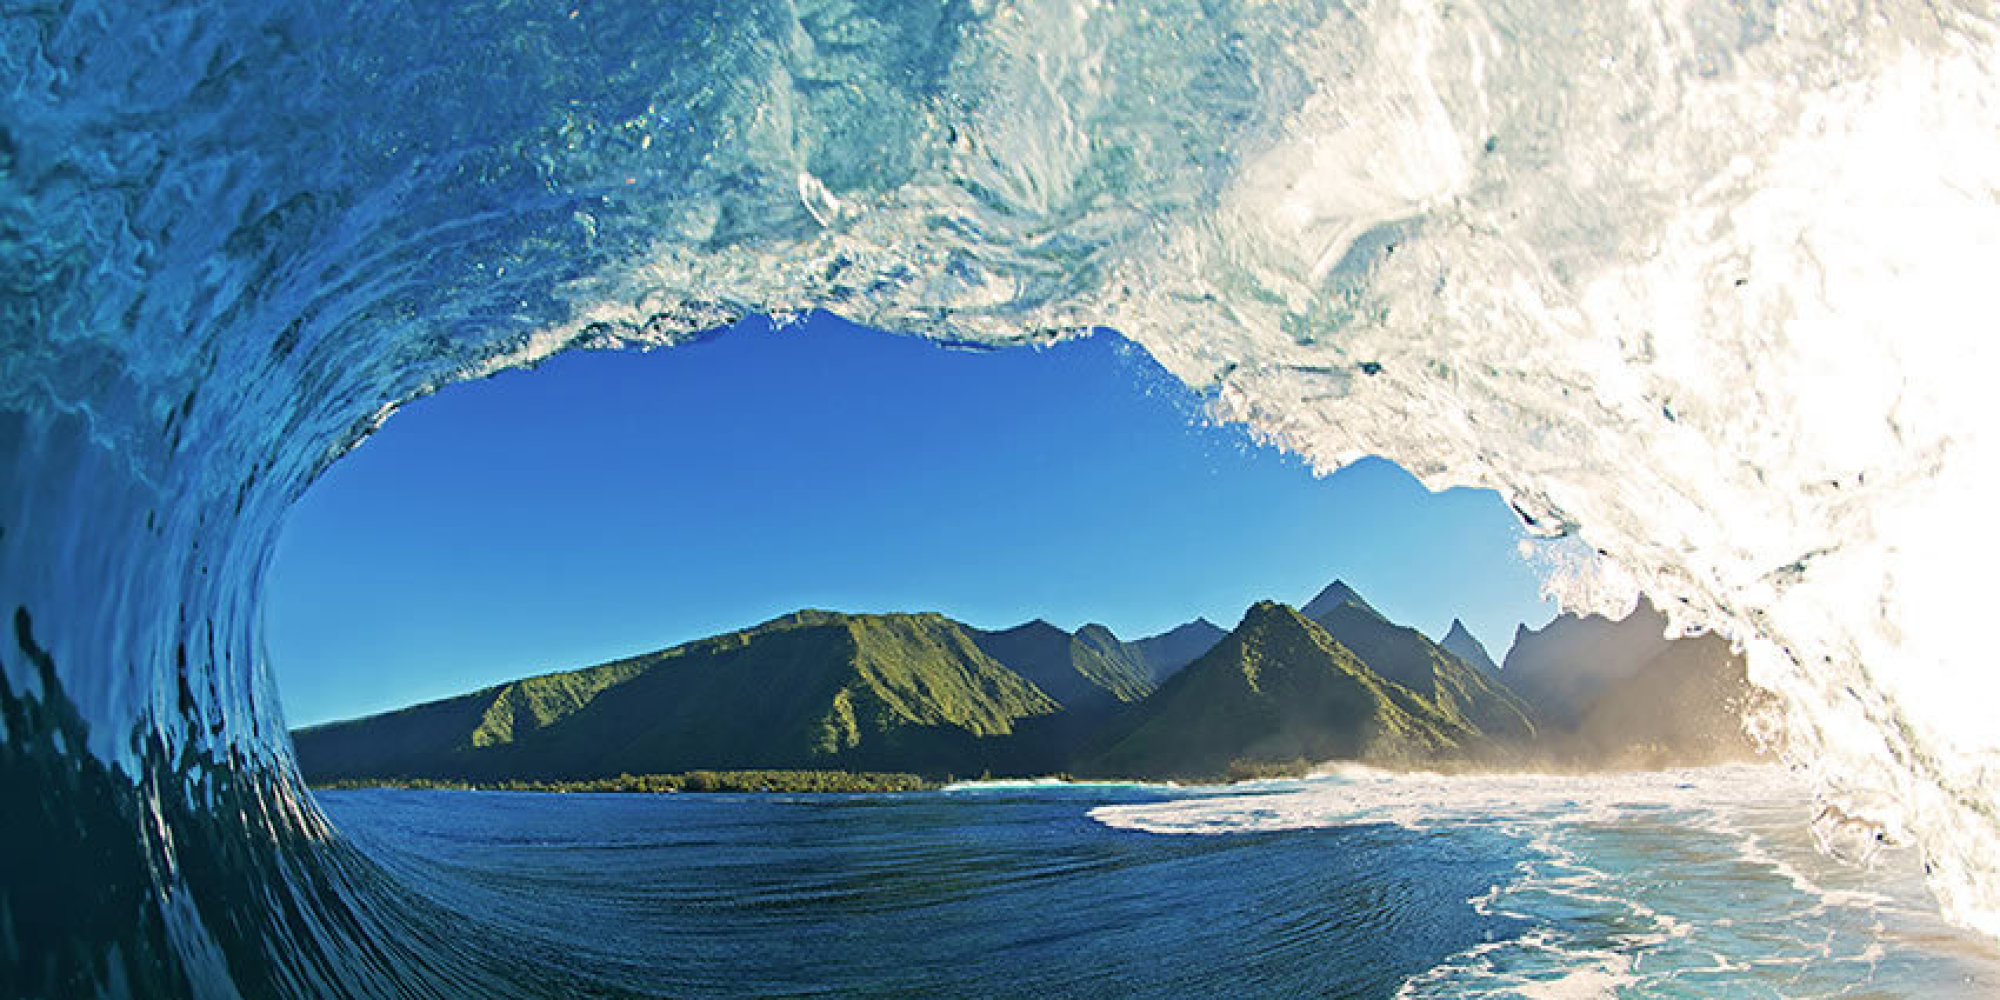 Displaying Image For Ocean Wave Photography Clark Little